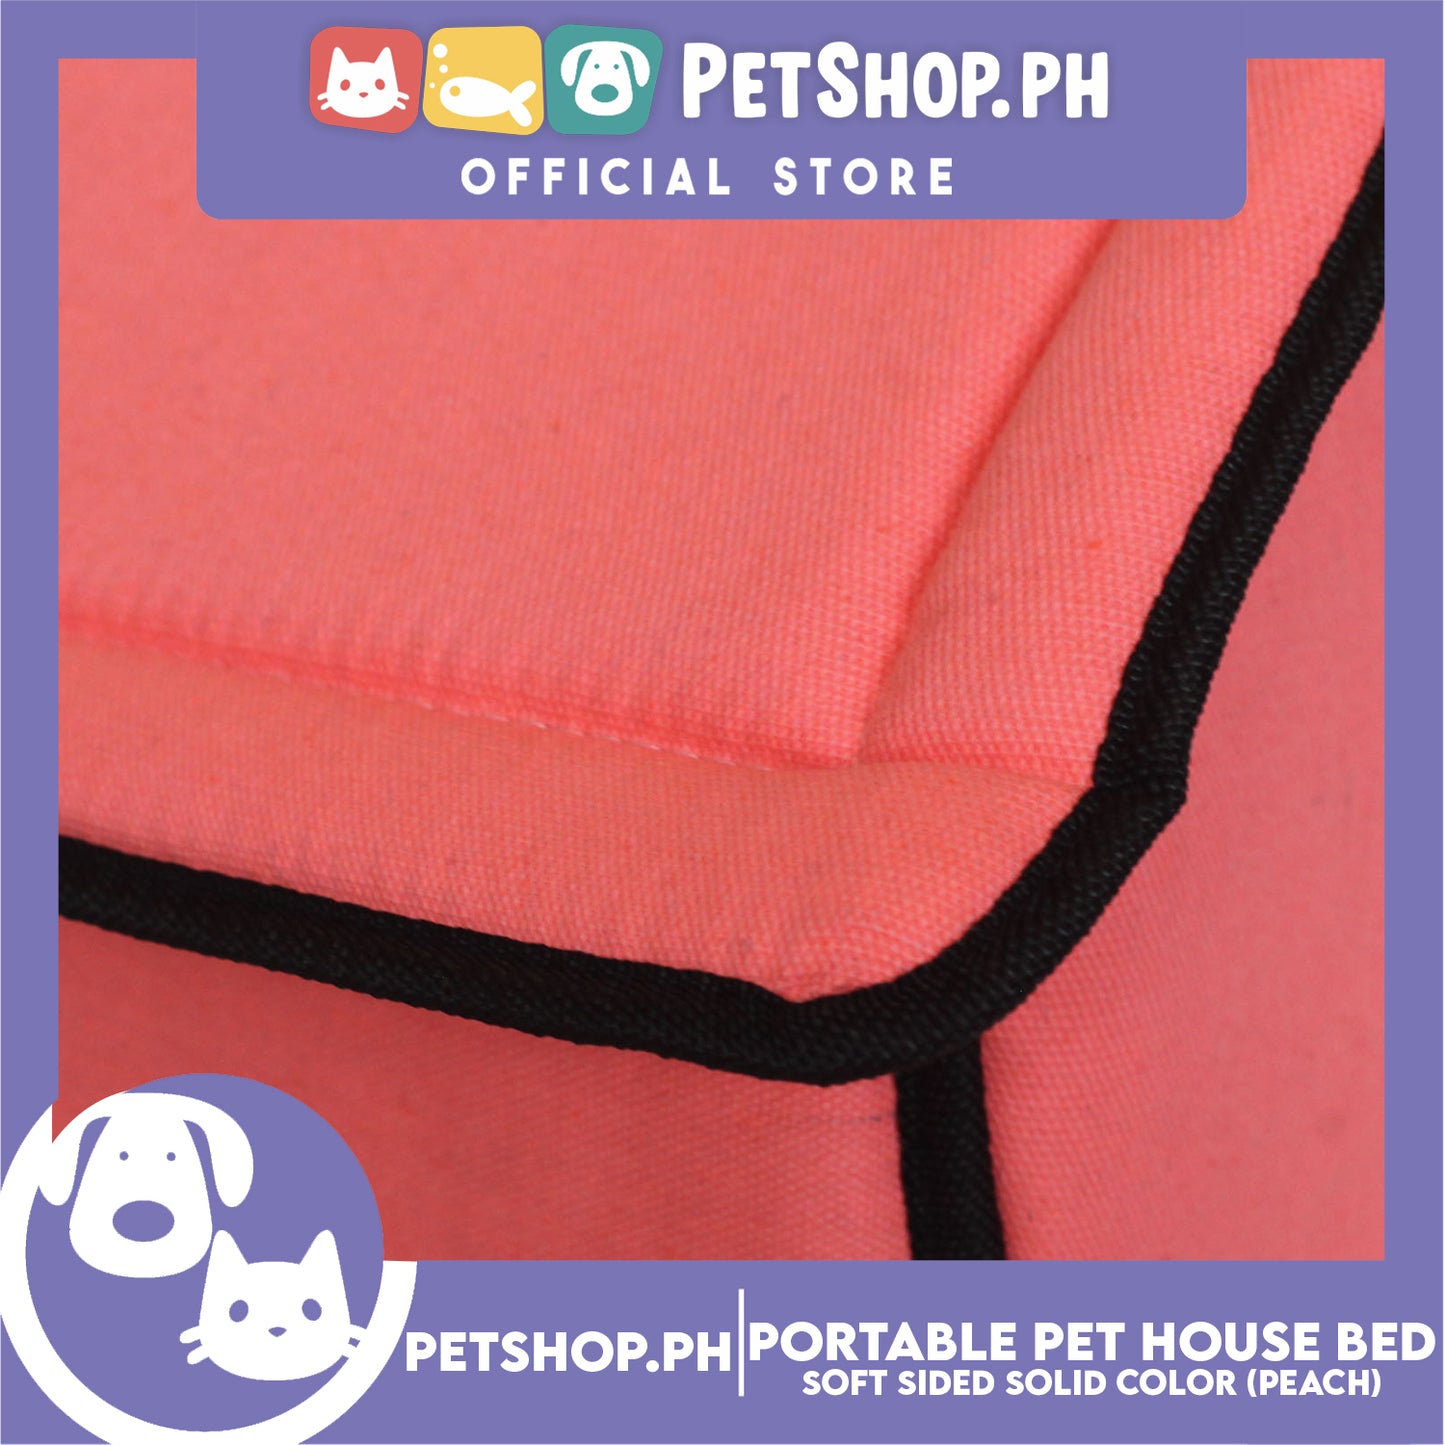 Portable Pet House Bed With Soft Sided Solid Color 30x33x32cm Medium (Peach)